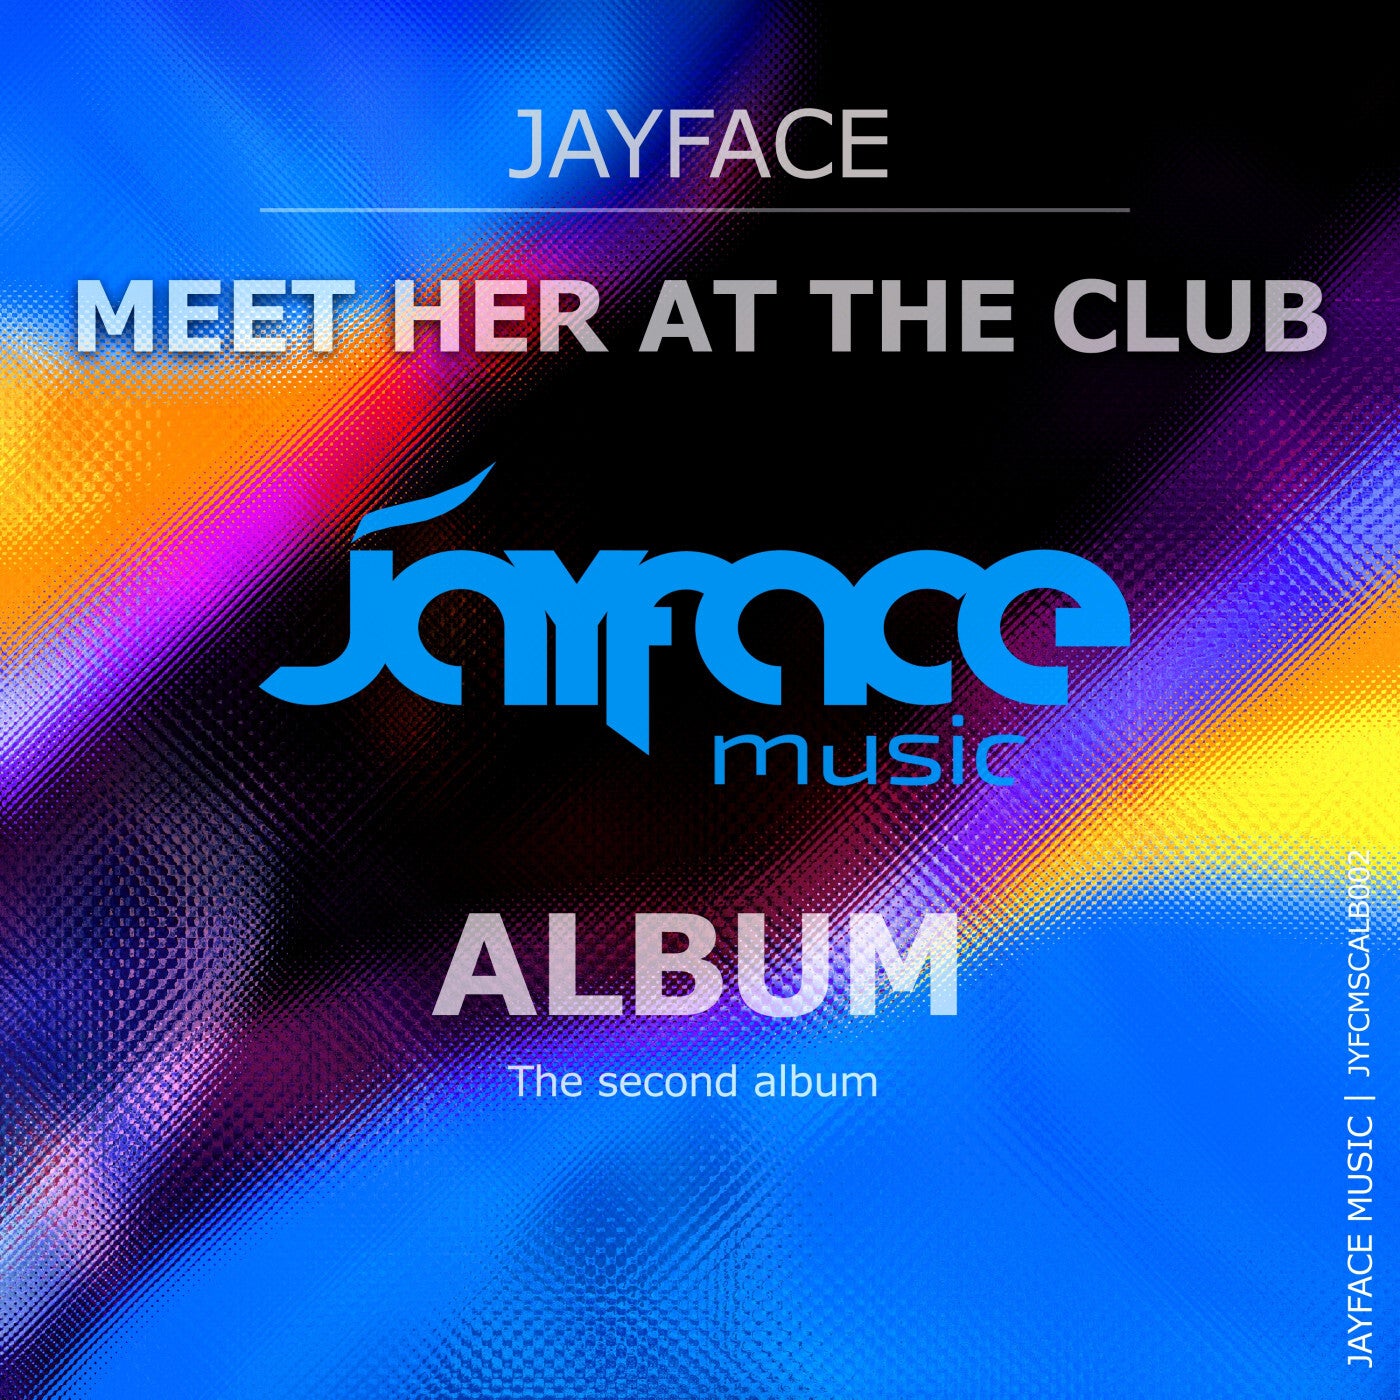 Meet Her At The Club Album